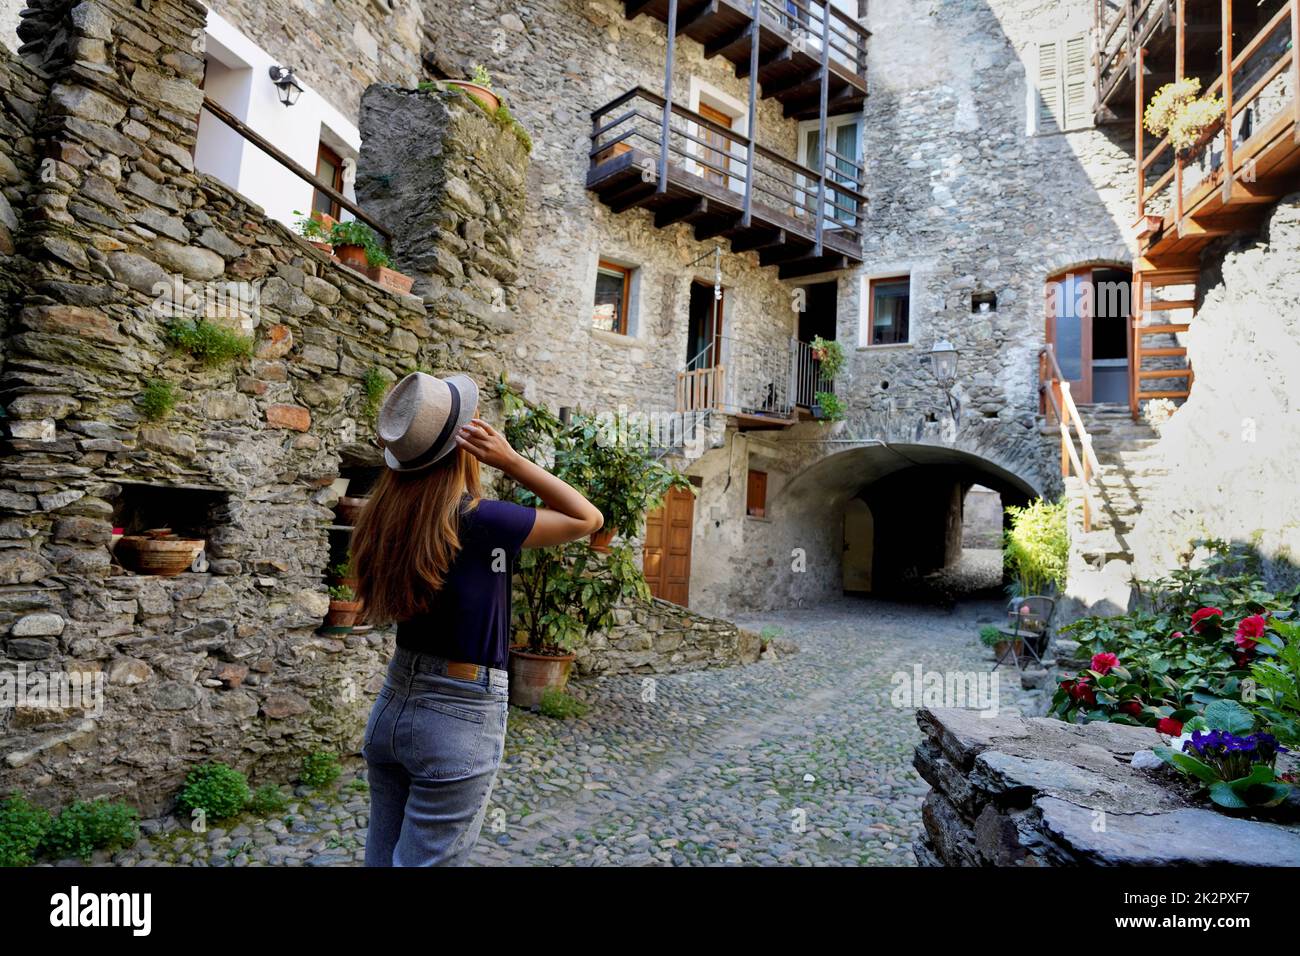 Beautiful young woman visiting Sondrio picturesque cozy alpine town in Valtellina, Lombardy, Italy Stock Photo